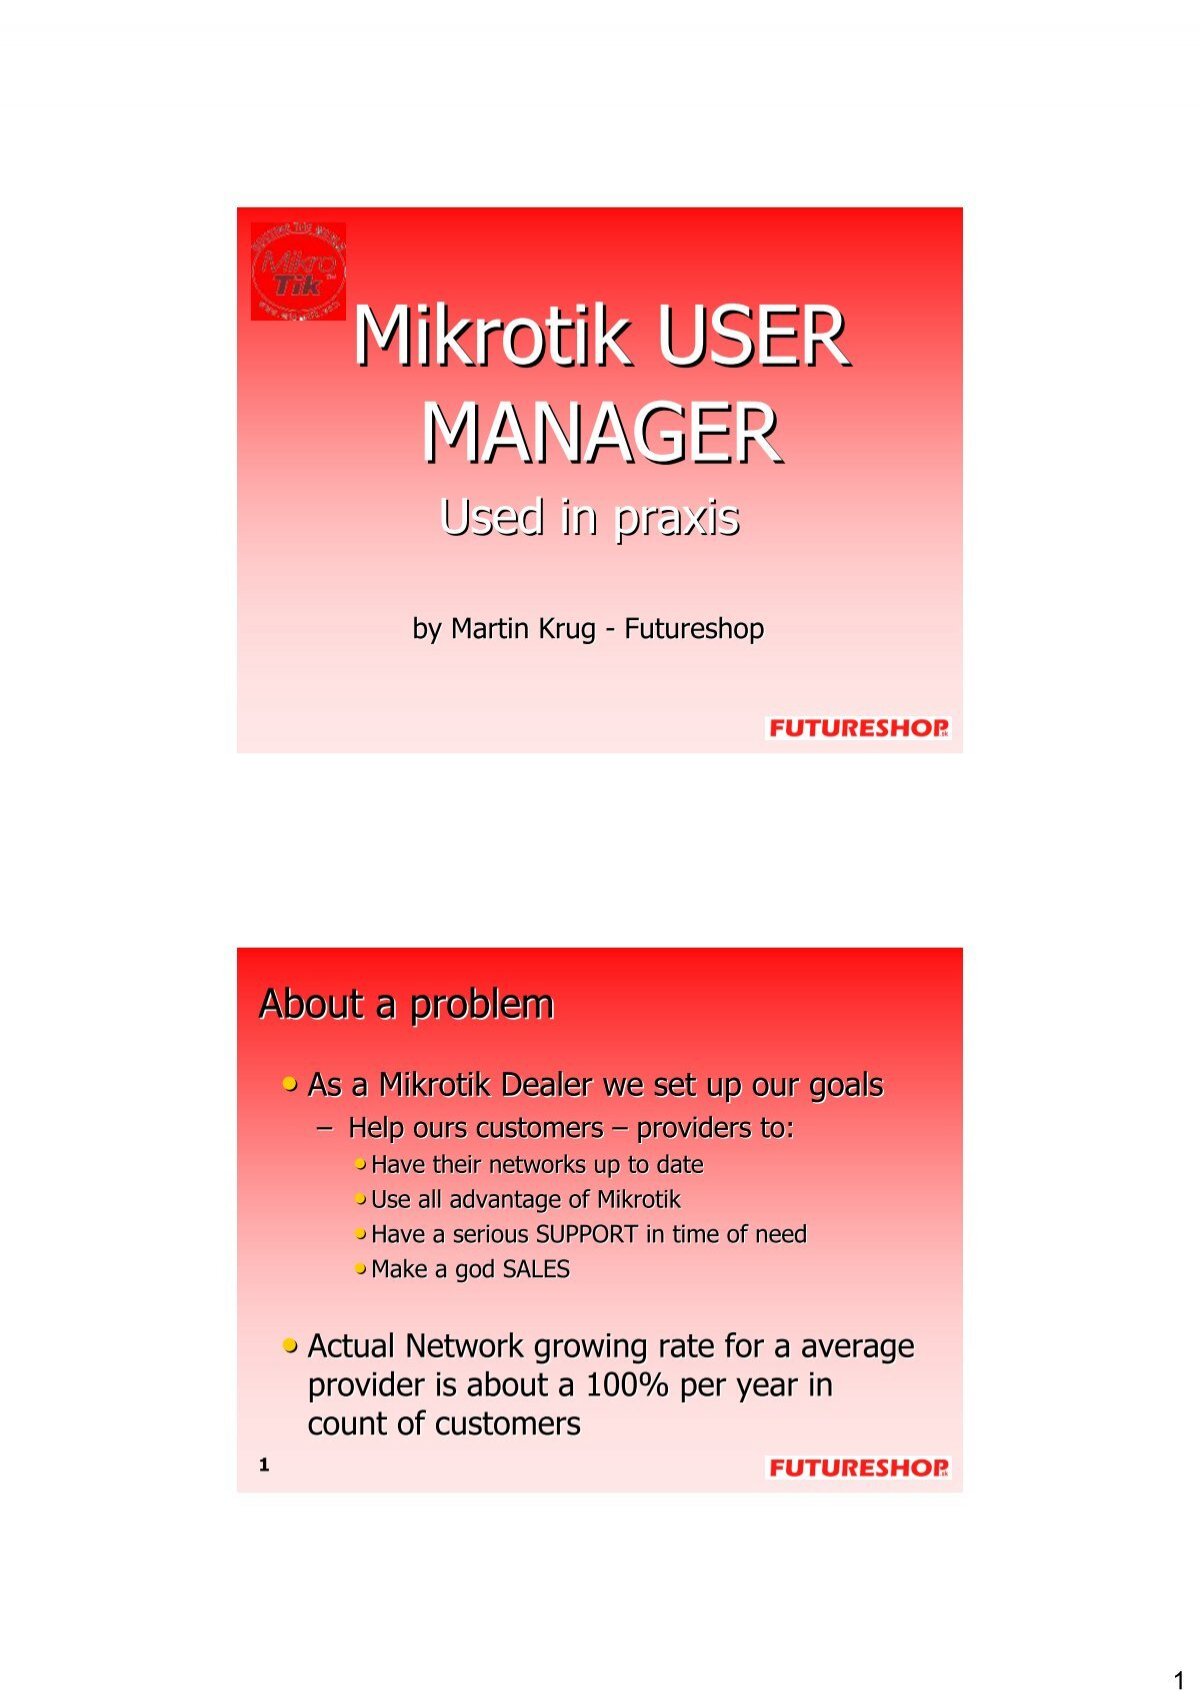 How to remove expired users in user manager in mikrotik solved paper